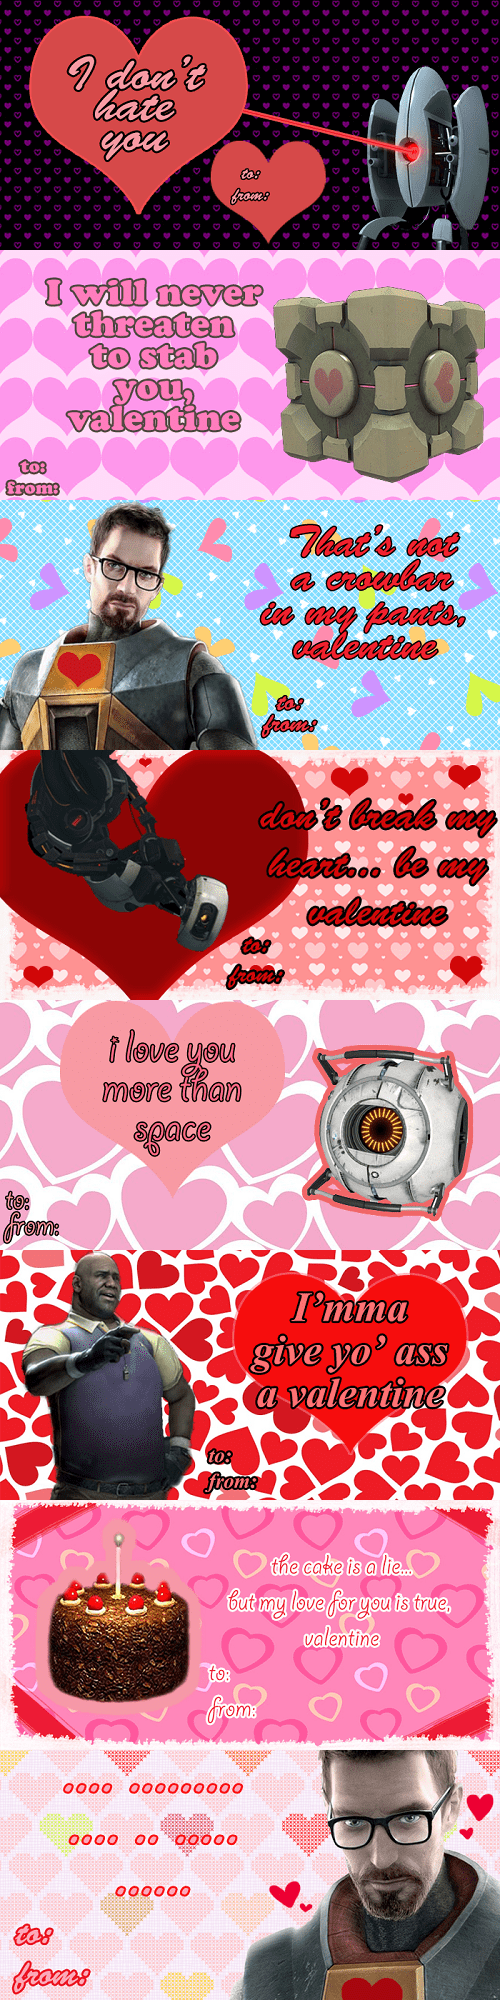 These Valve Valentine's Day Cards Are Not a Lie - Video ...